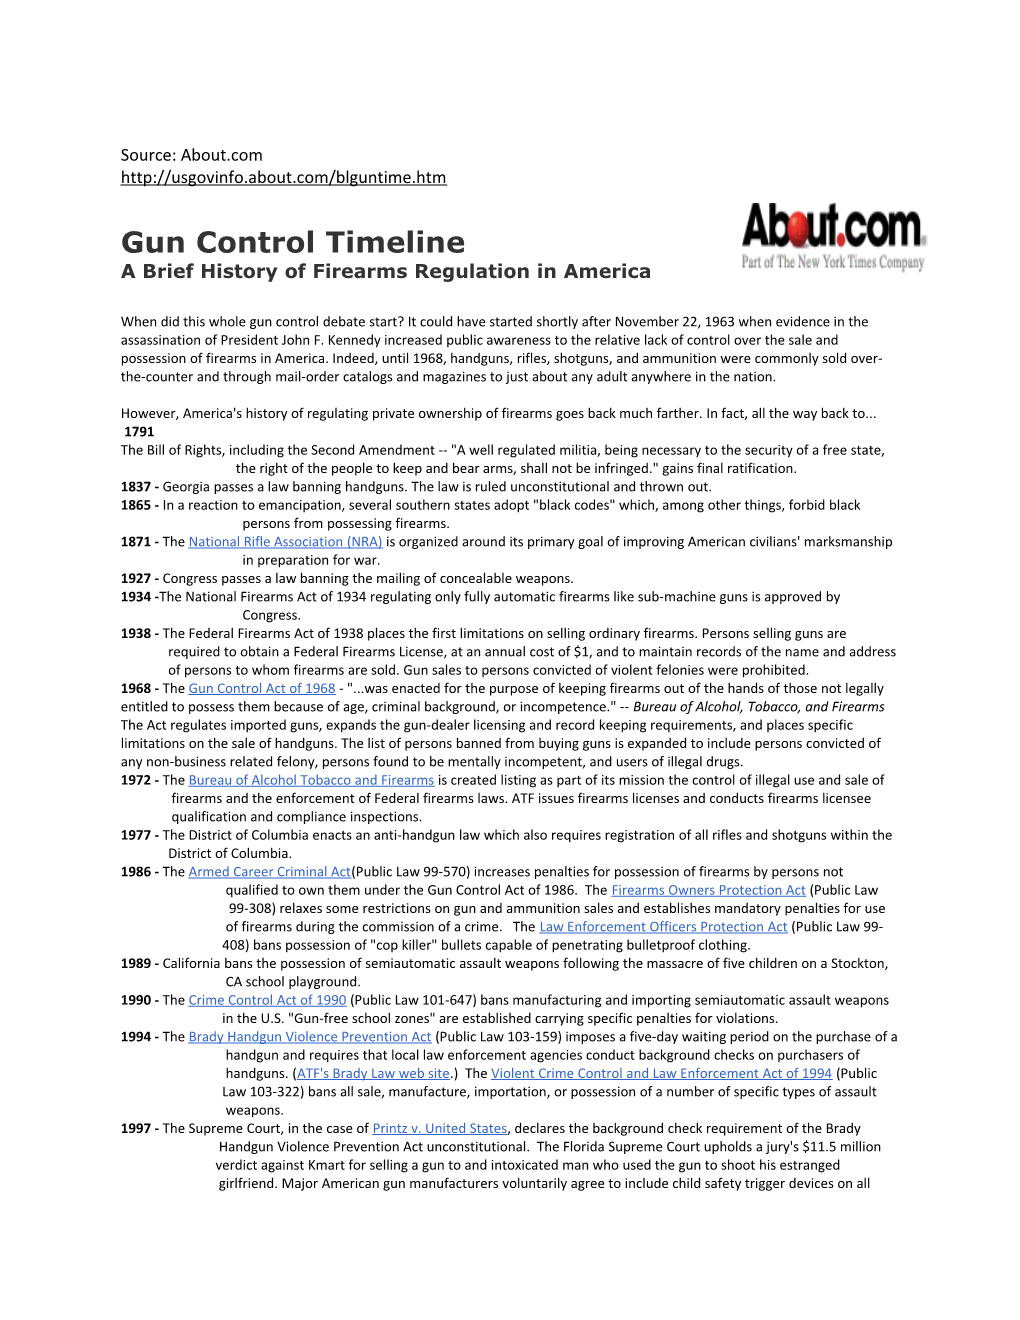 Gun Control Timeline a Brief History of Firearms Regulation in America